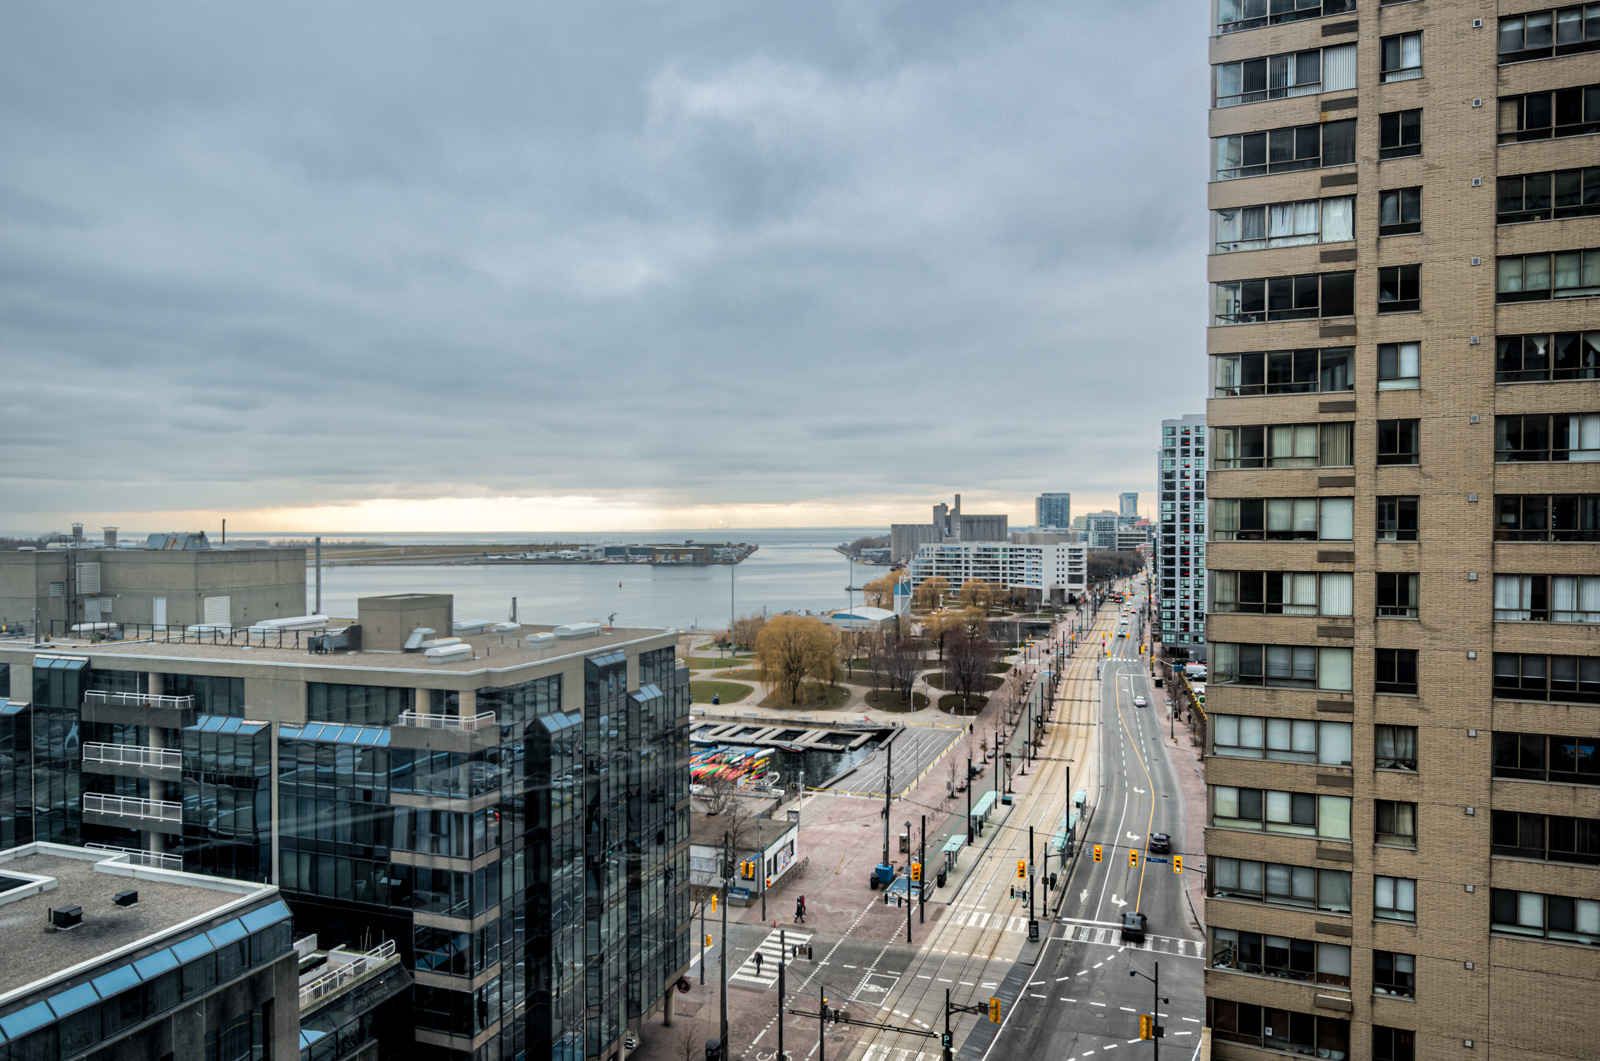 Balcony view of Lake Ontario, buildings, streets, cars and Billy Bishop Airport in distance.